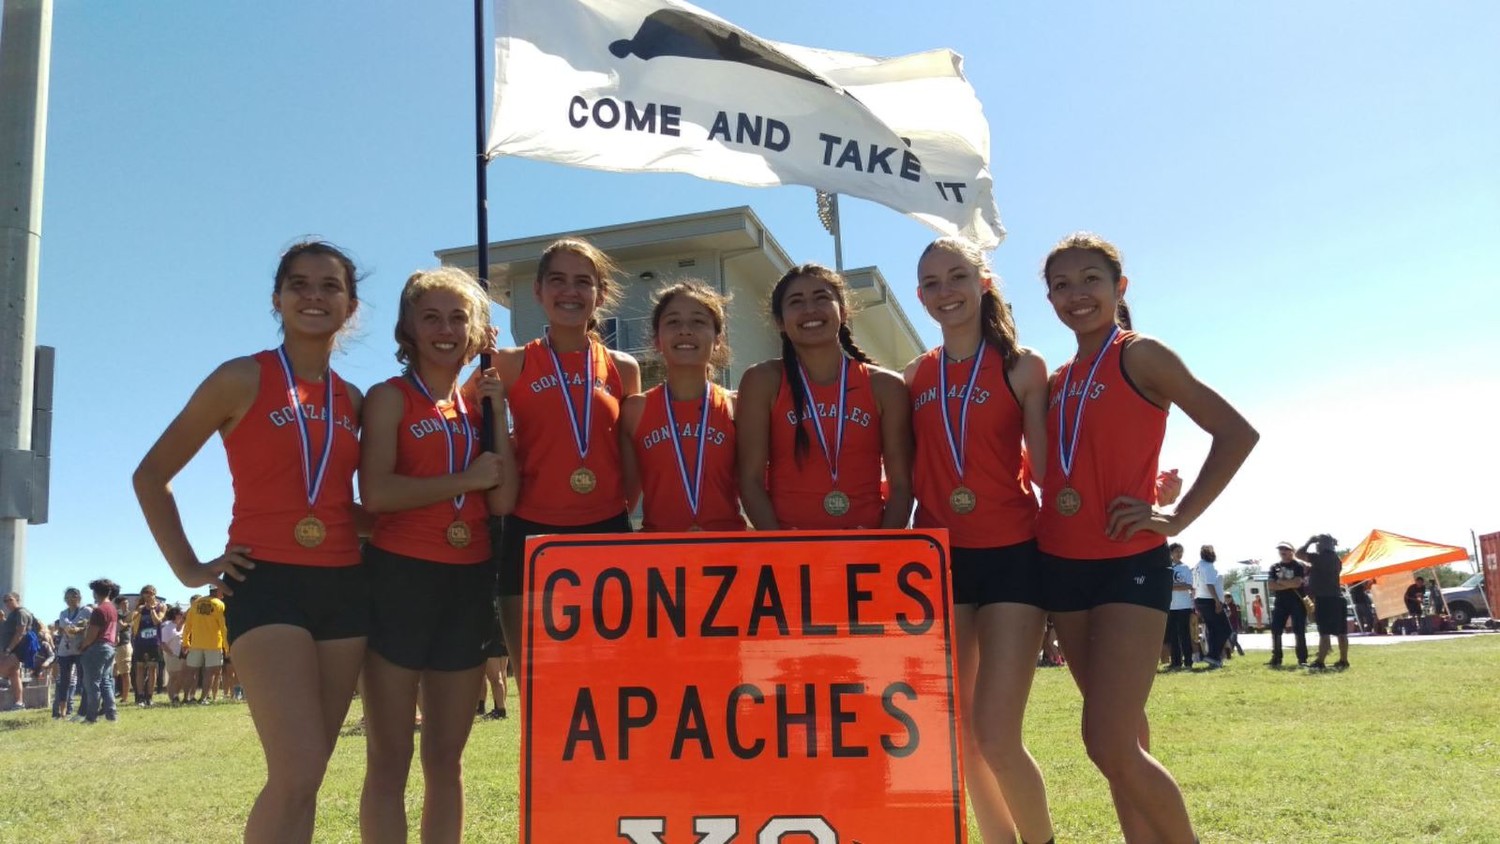 The Gonzales Lady Apaches team of Veronica Moreno, Romy Cantu, Haley Garza, Stephanie Reyna, Shelby Davis, Krystalynn Buesing and Maura Garcia all qualified for state after taking third in the Region IV-4A meet.